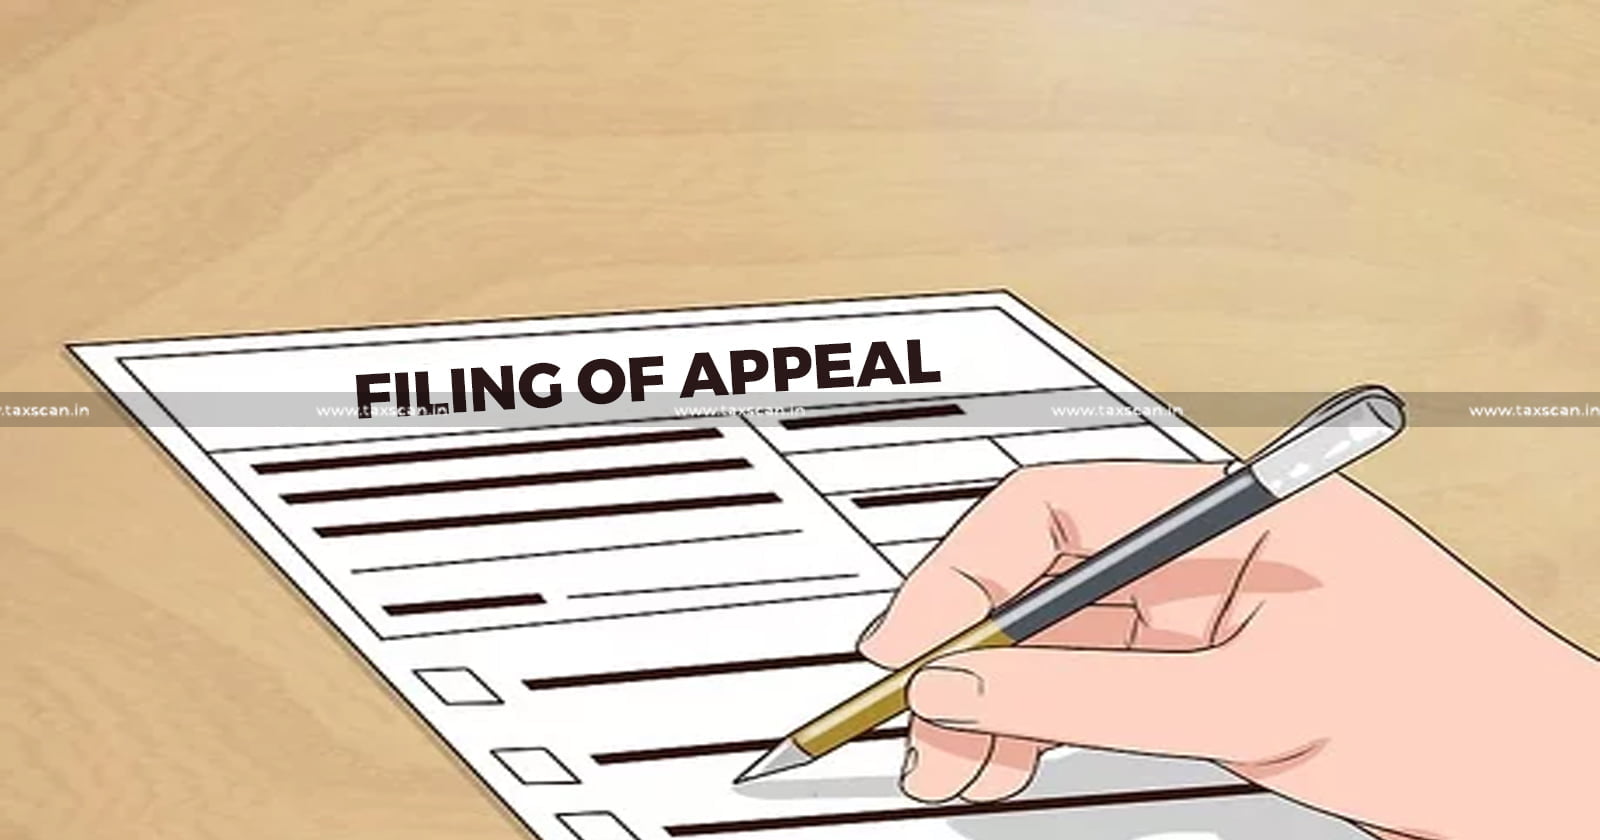 filing of Appeal - CA - Appeal - Income Tax - GST Compliance - ITAT - taxscan